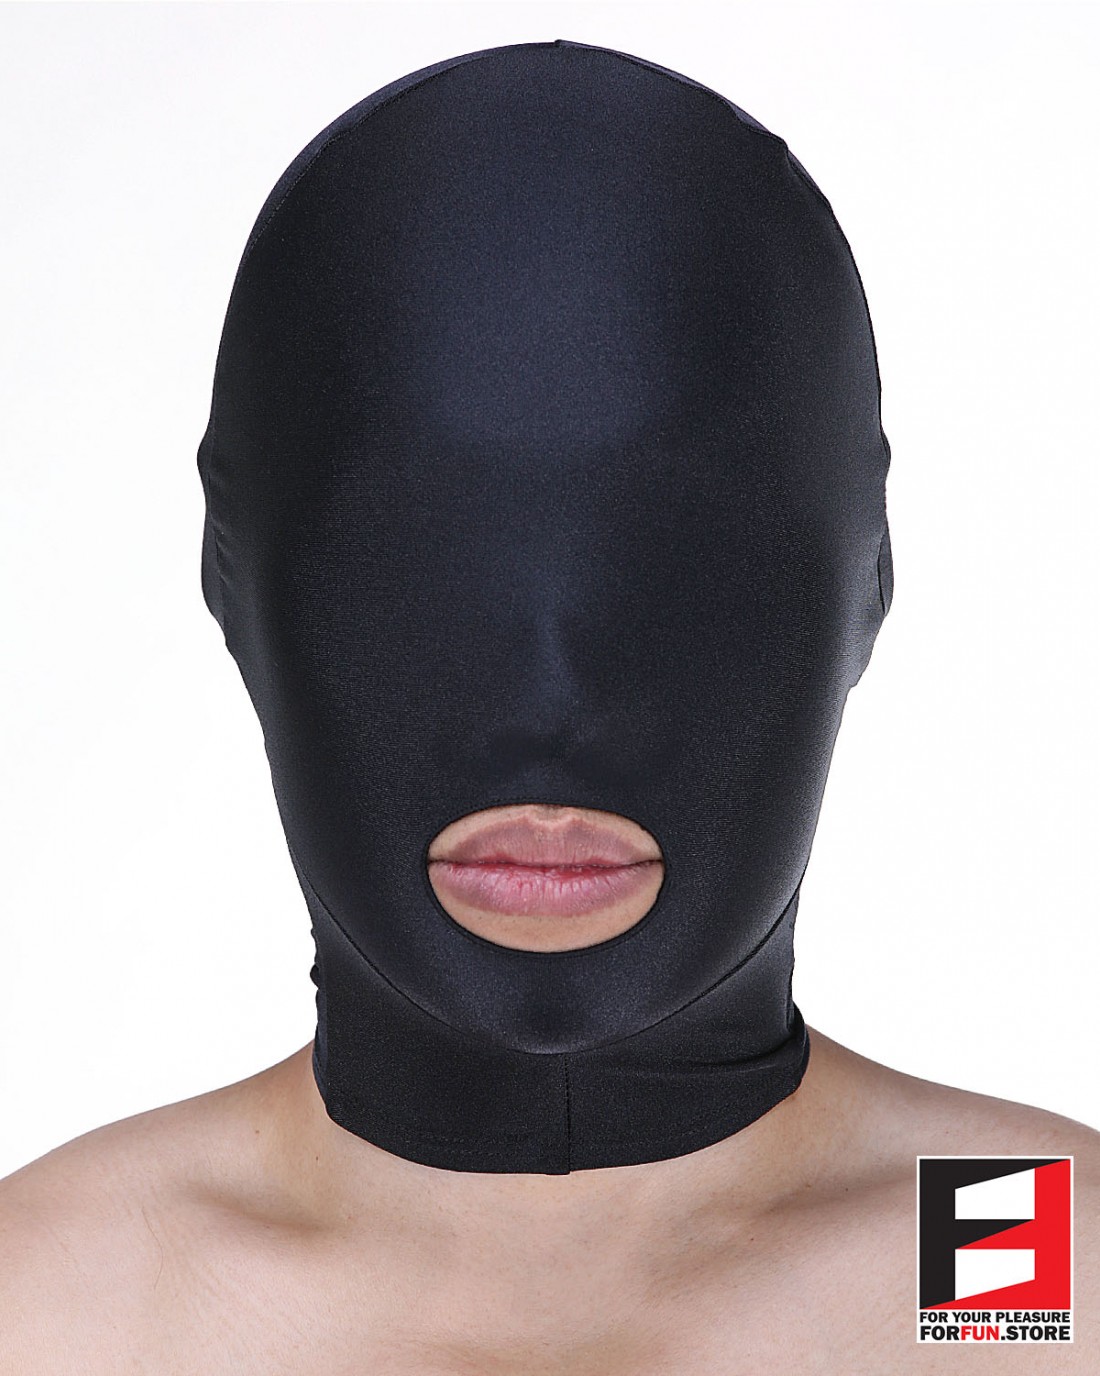 SPANDEX MASK FOR YOUR PLEASURE : FORFUN